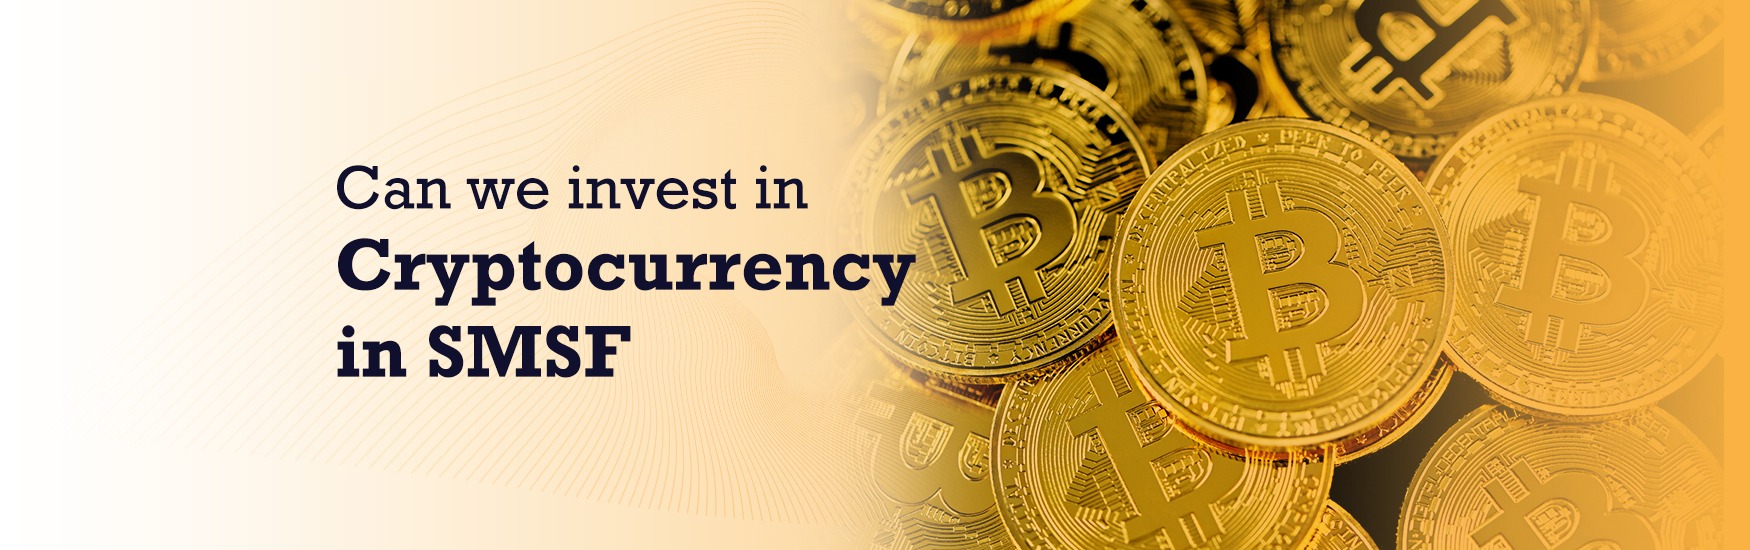 How Can One Invest In Cryptocurrency? : Cryptocurrency ...